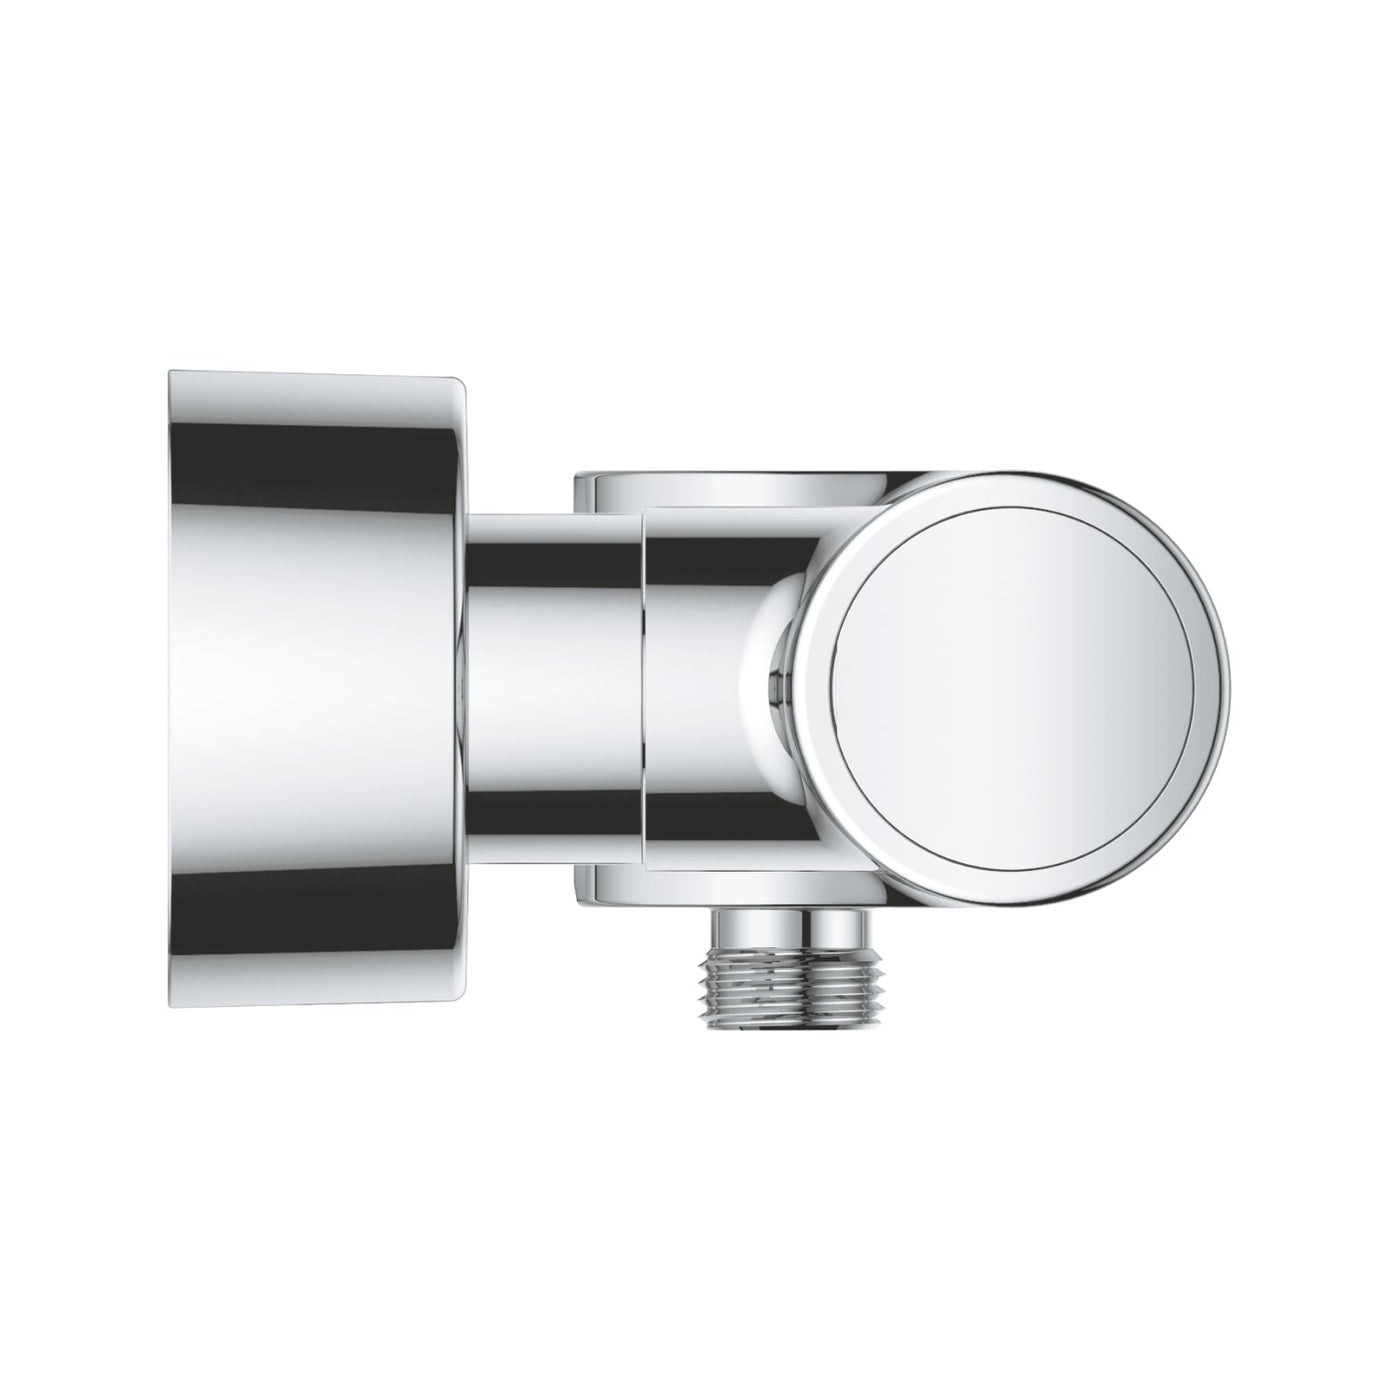 Grohe Chrome Eurosmart Cosmopolitan E Special Infra-red electronic shower mixer with thermostatic temperature control - Letta London - Bar Shower Valves